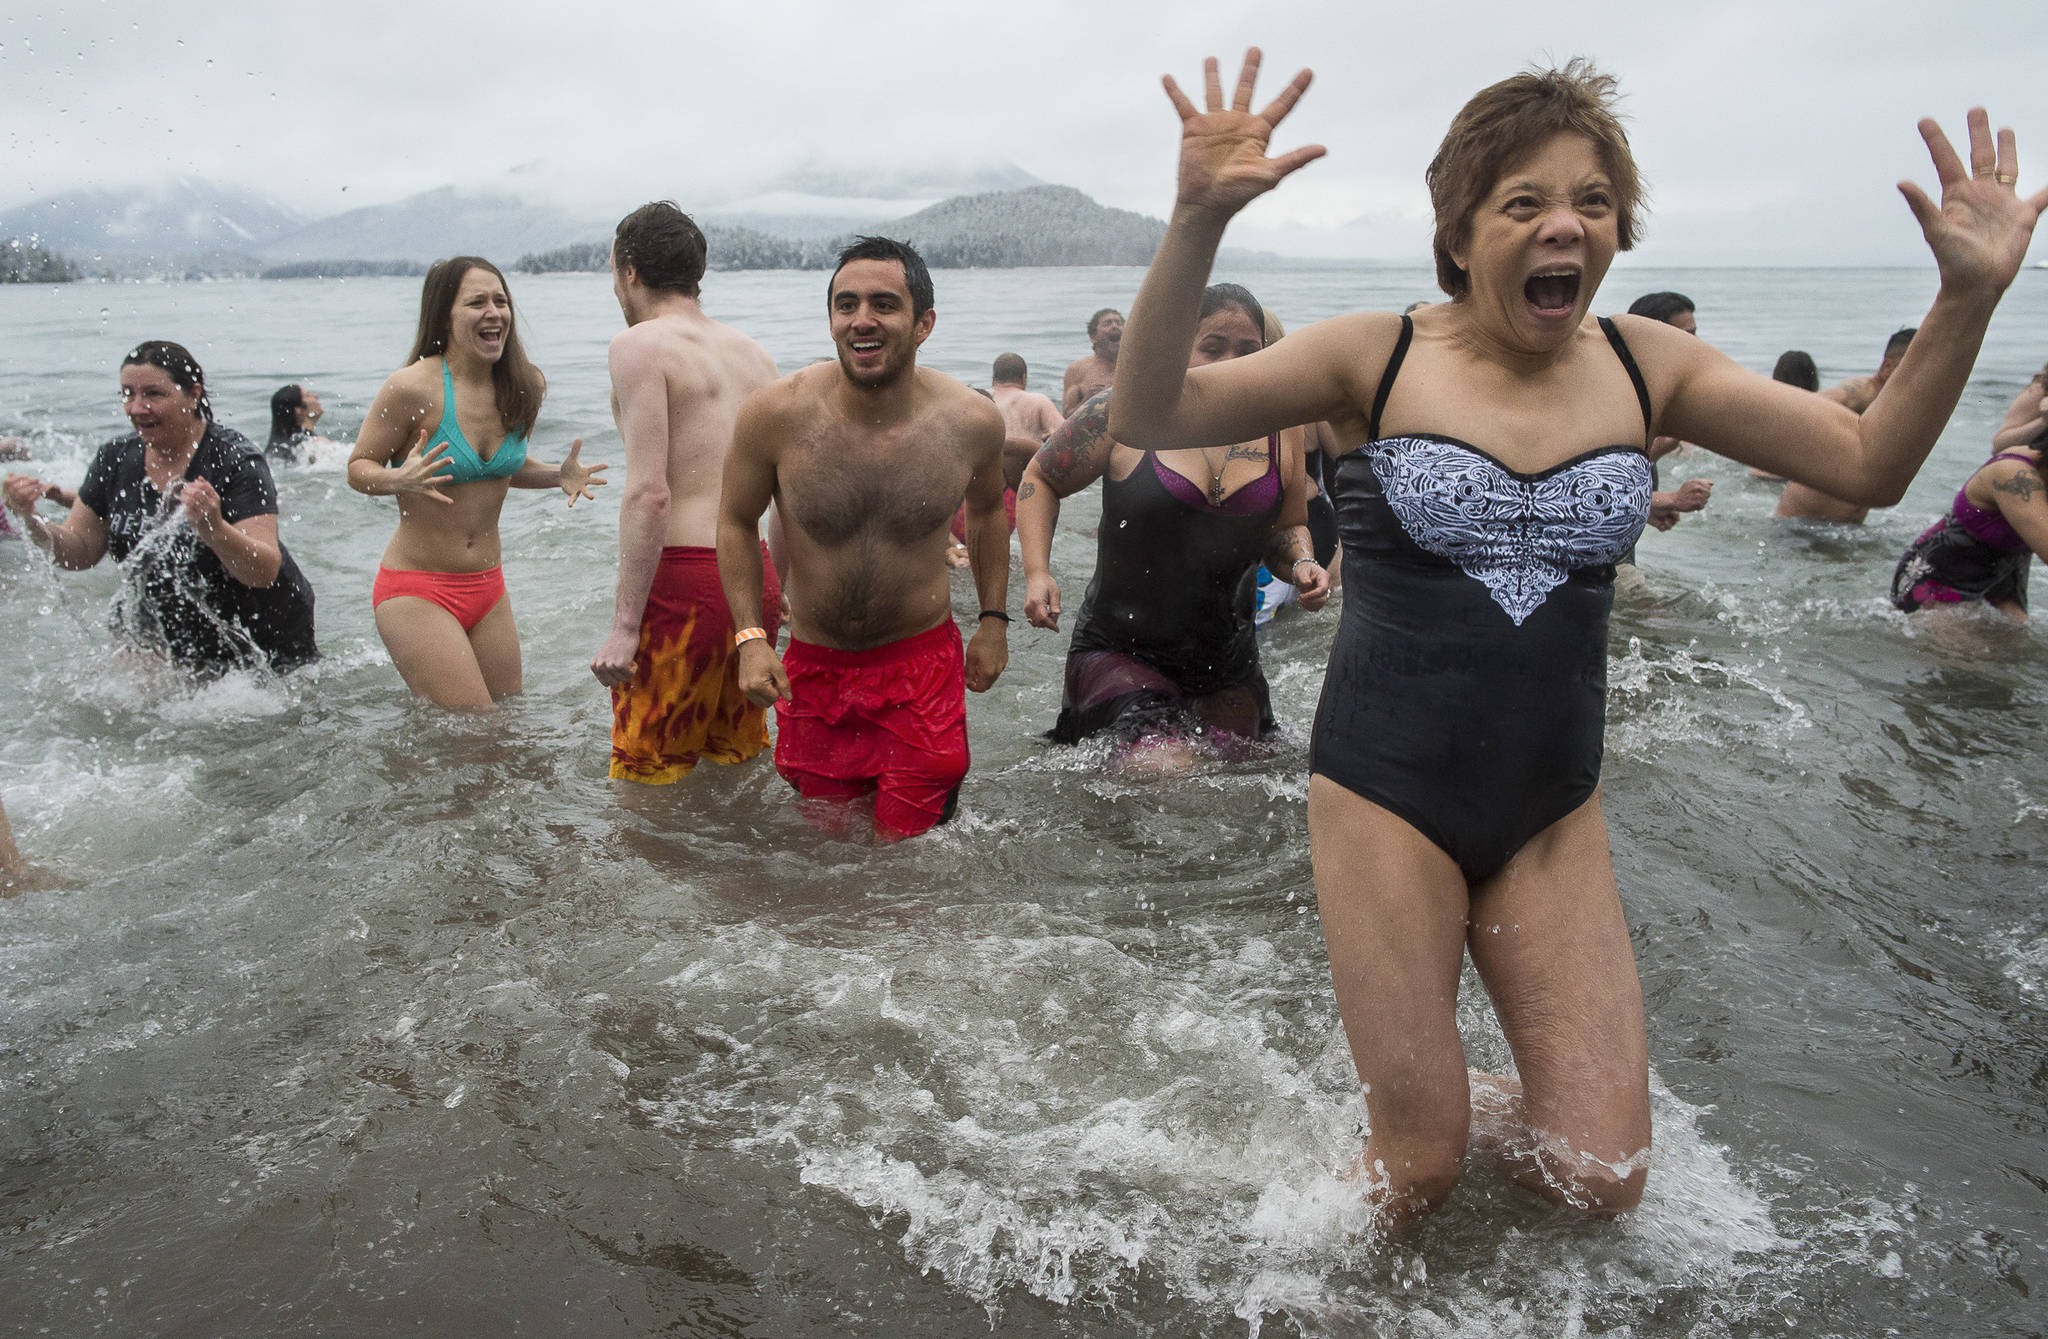 Juneau residents react to the 37 degree water temperature during the annual Polar Bear Dip at Auke Recreation beach on Monday, Jan. 1, 2018.